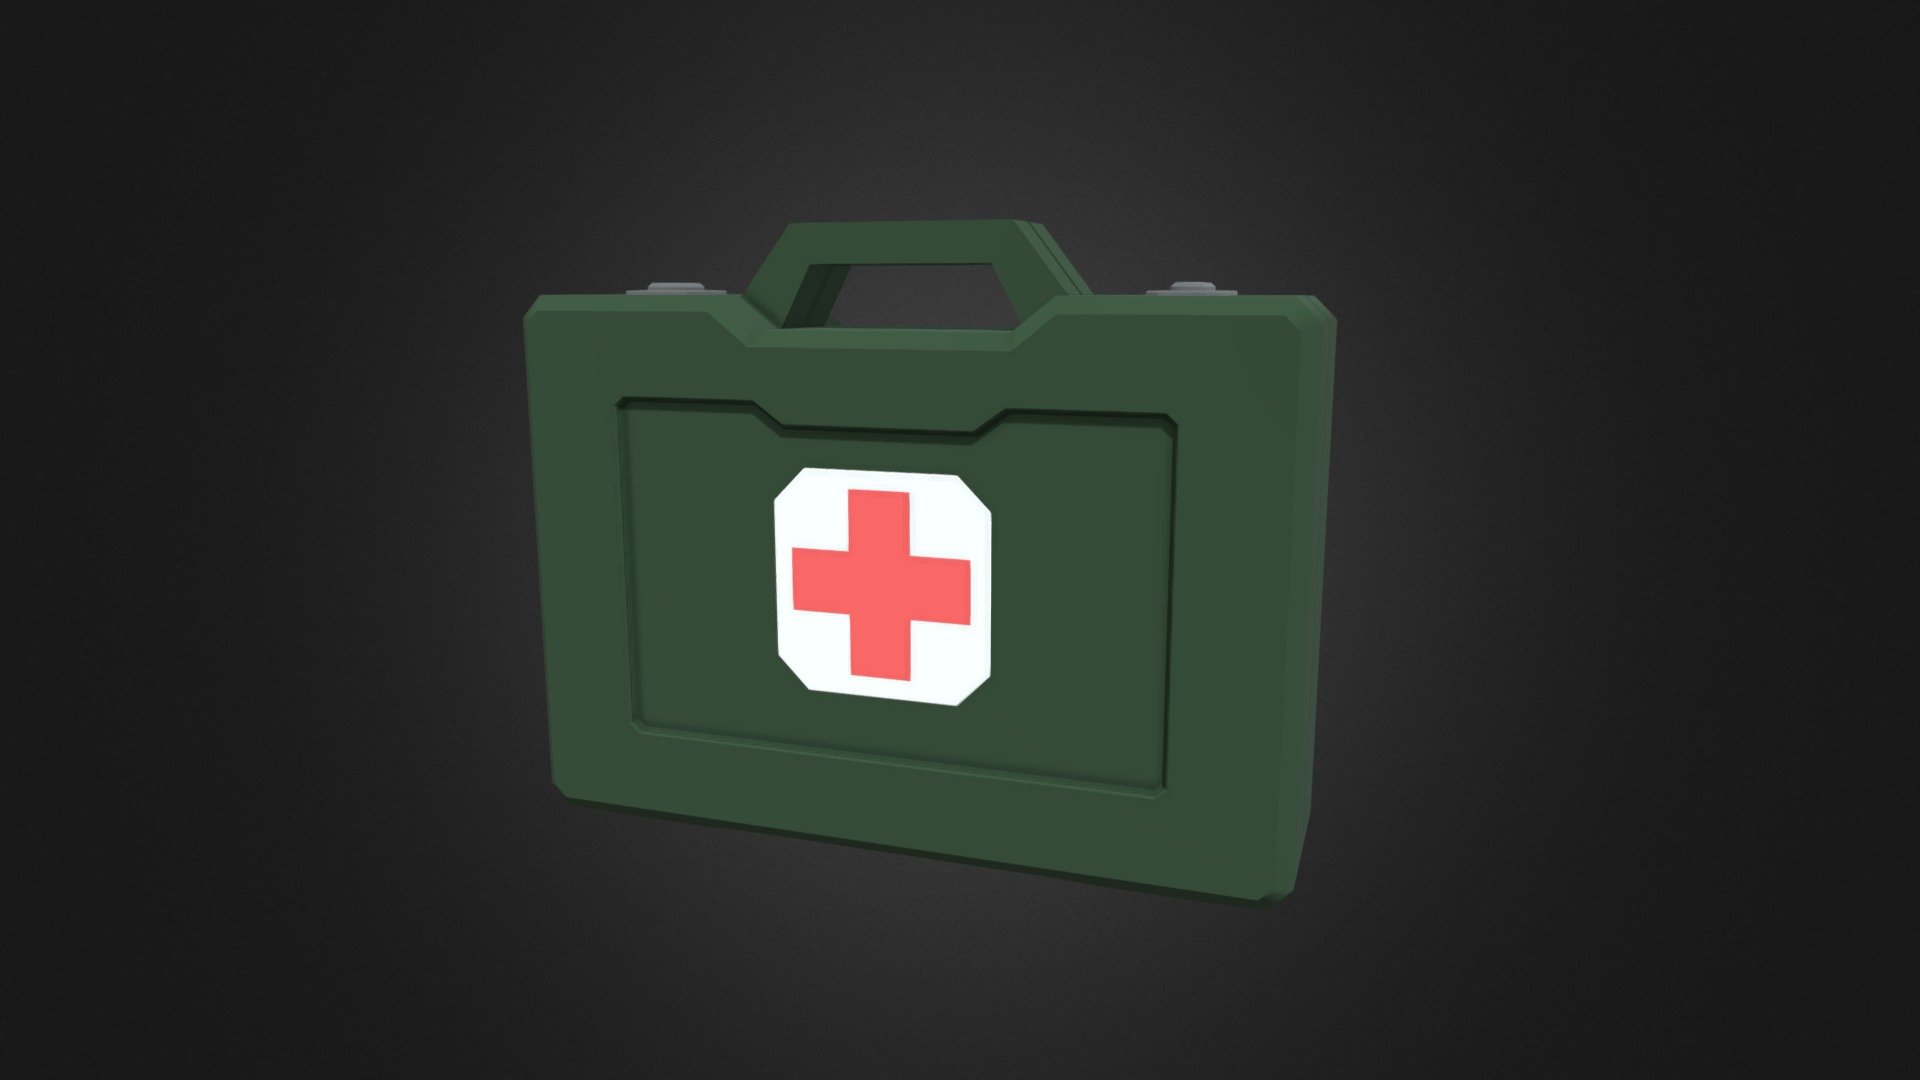 Lowpoly medkit.
Made with Autodesk Maya.
Feel free to use it 3d model